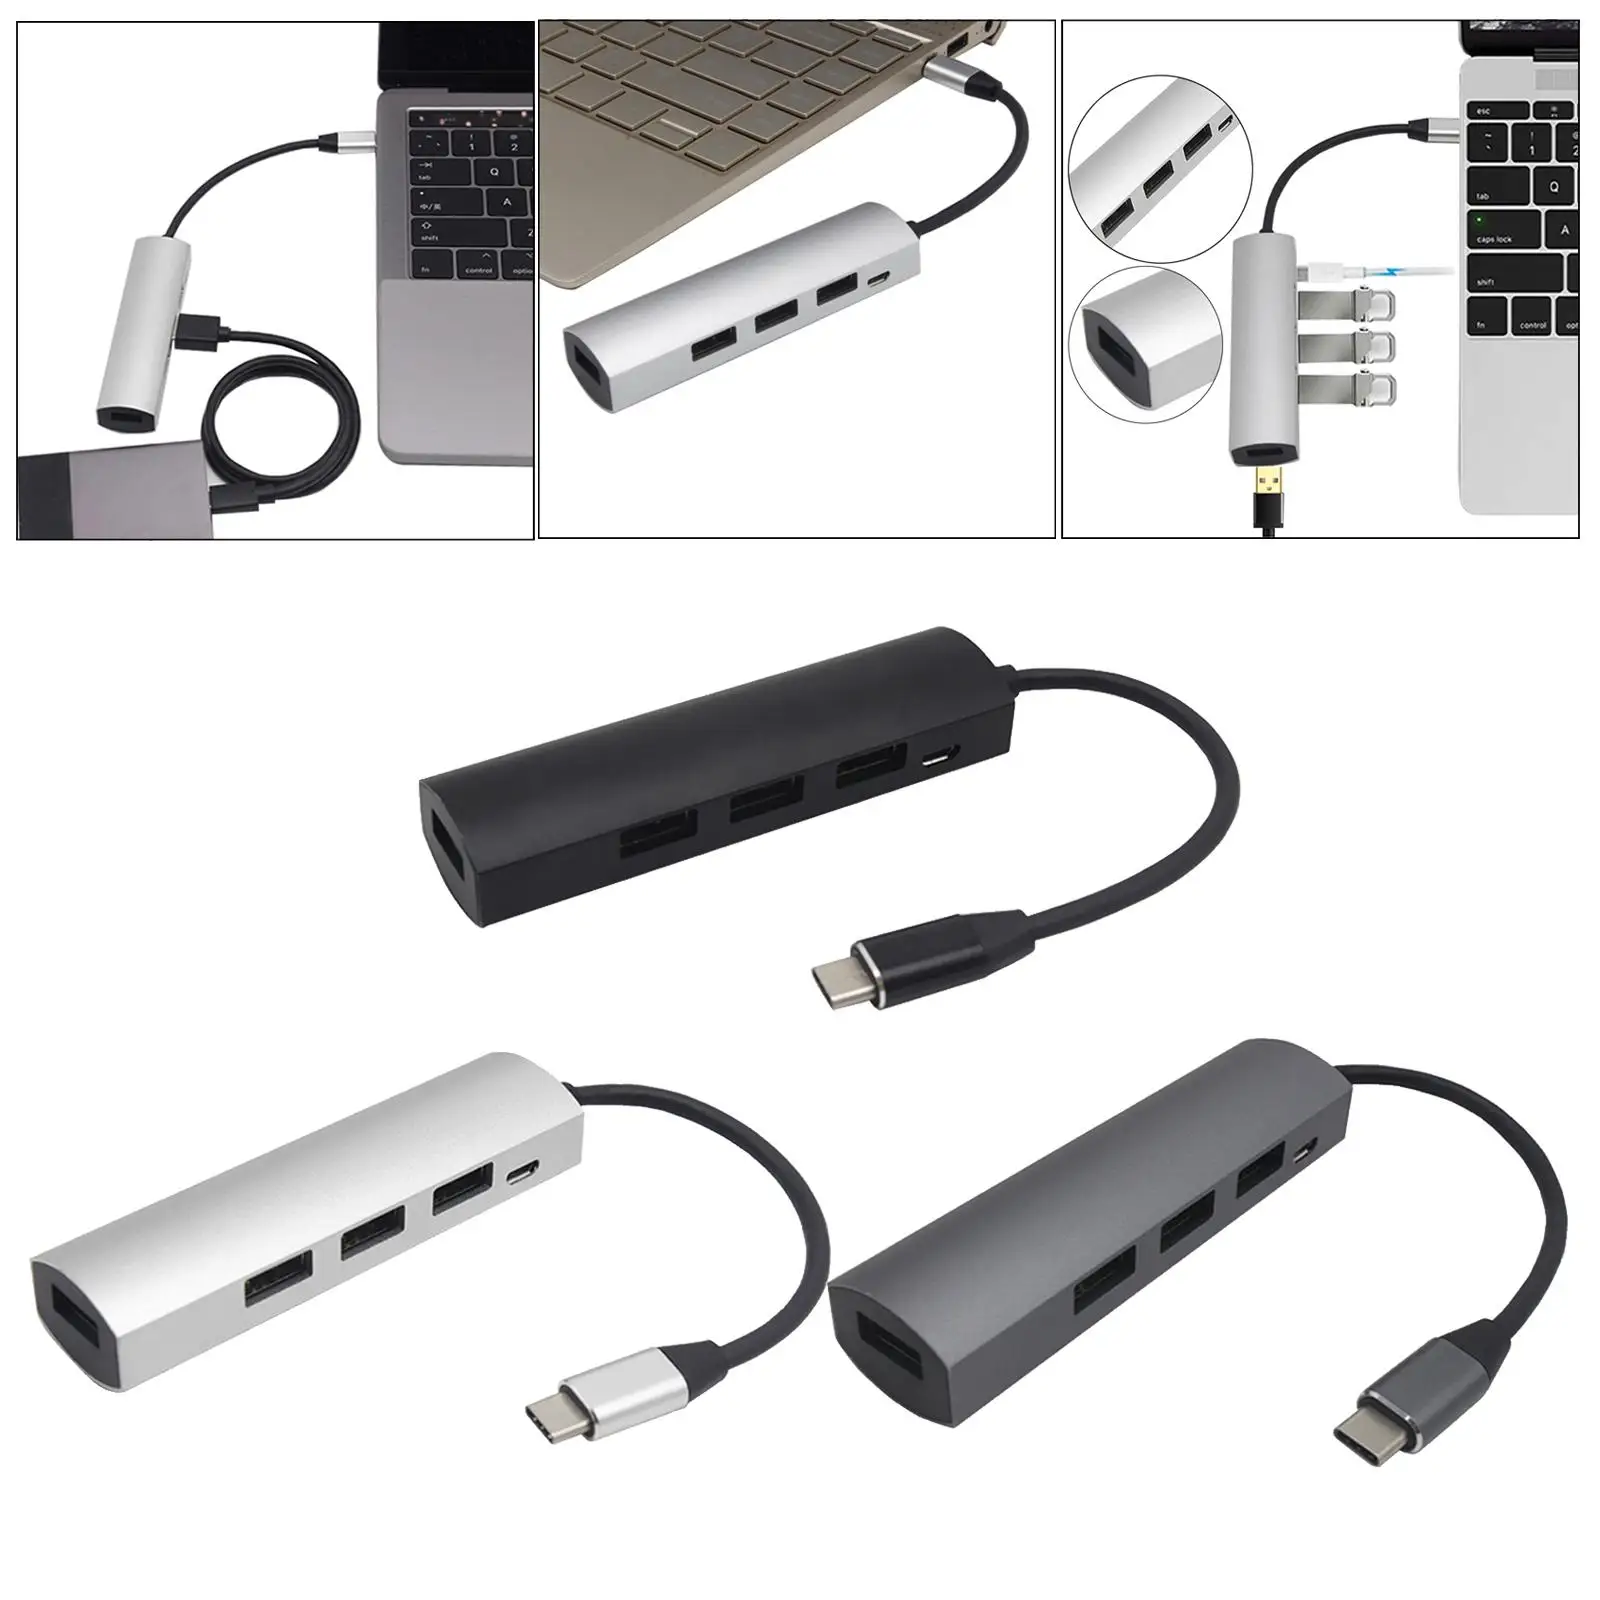   Dock Connectors USB 3.0 2.0 Female Adapter Cable Expansion Splitter Converter for 